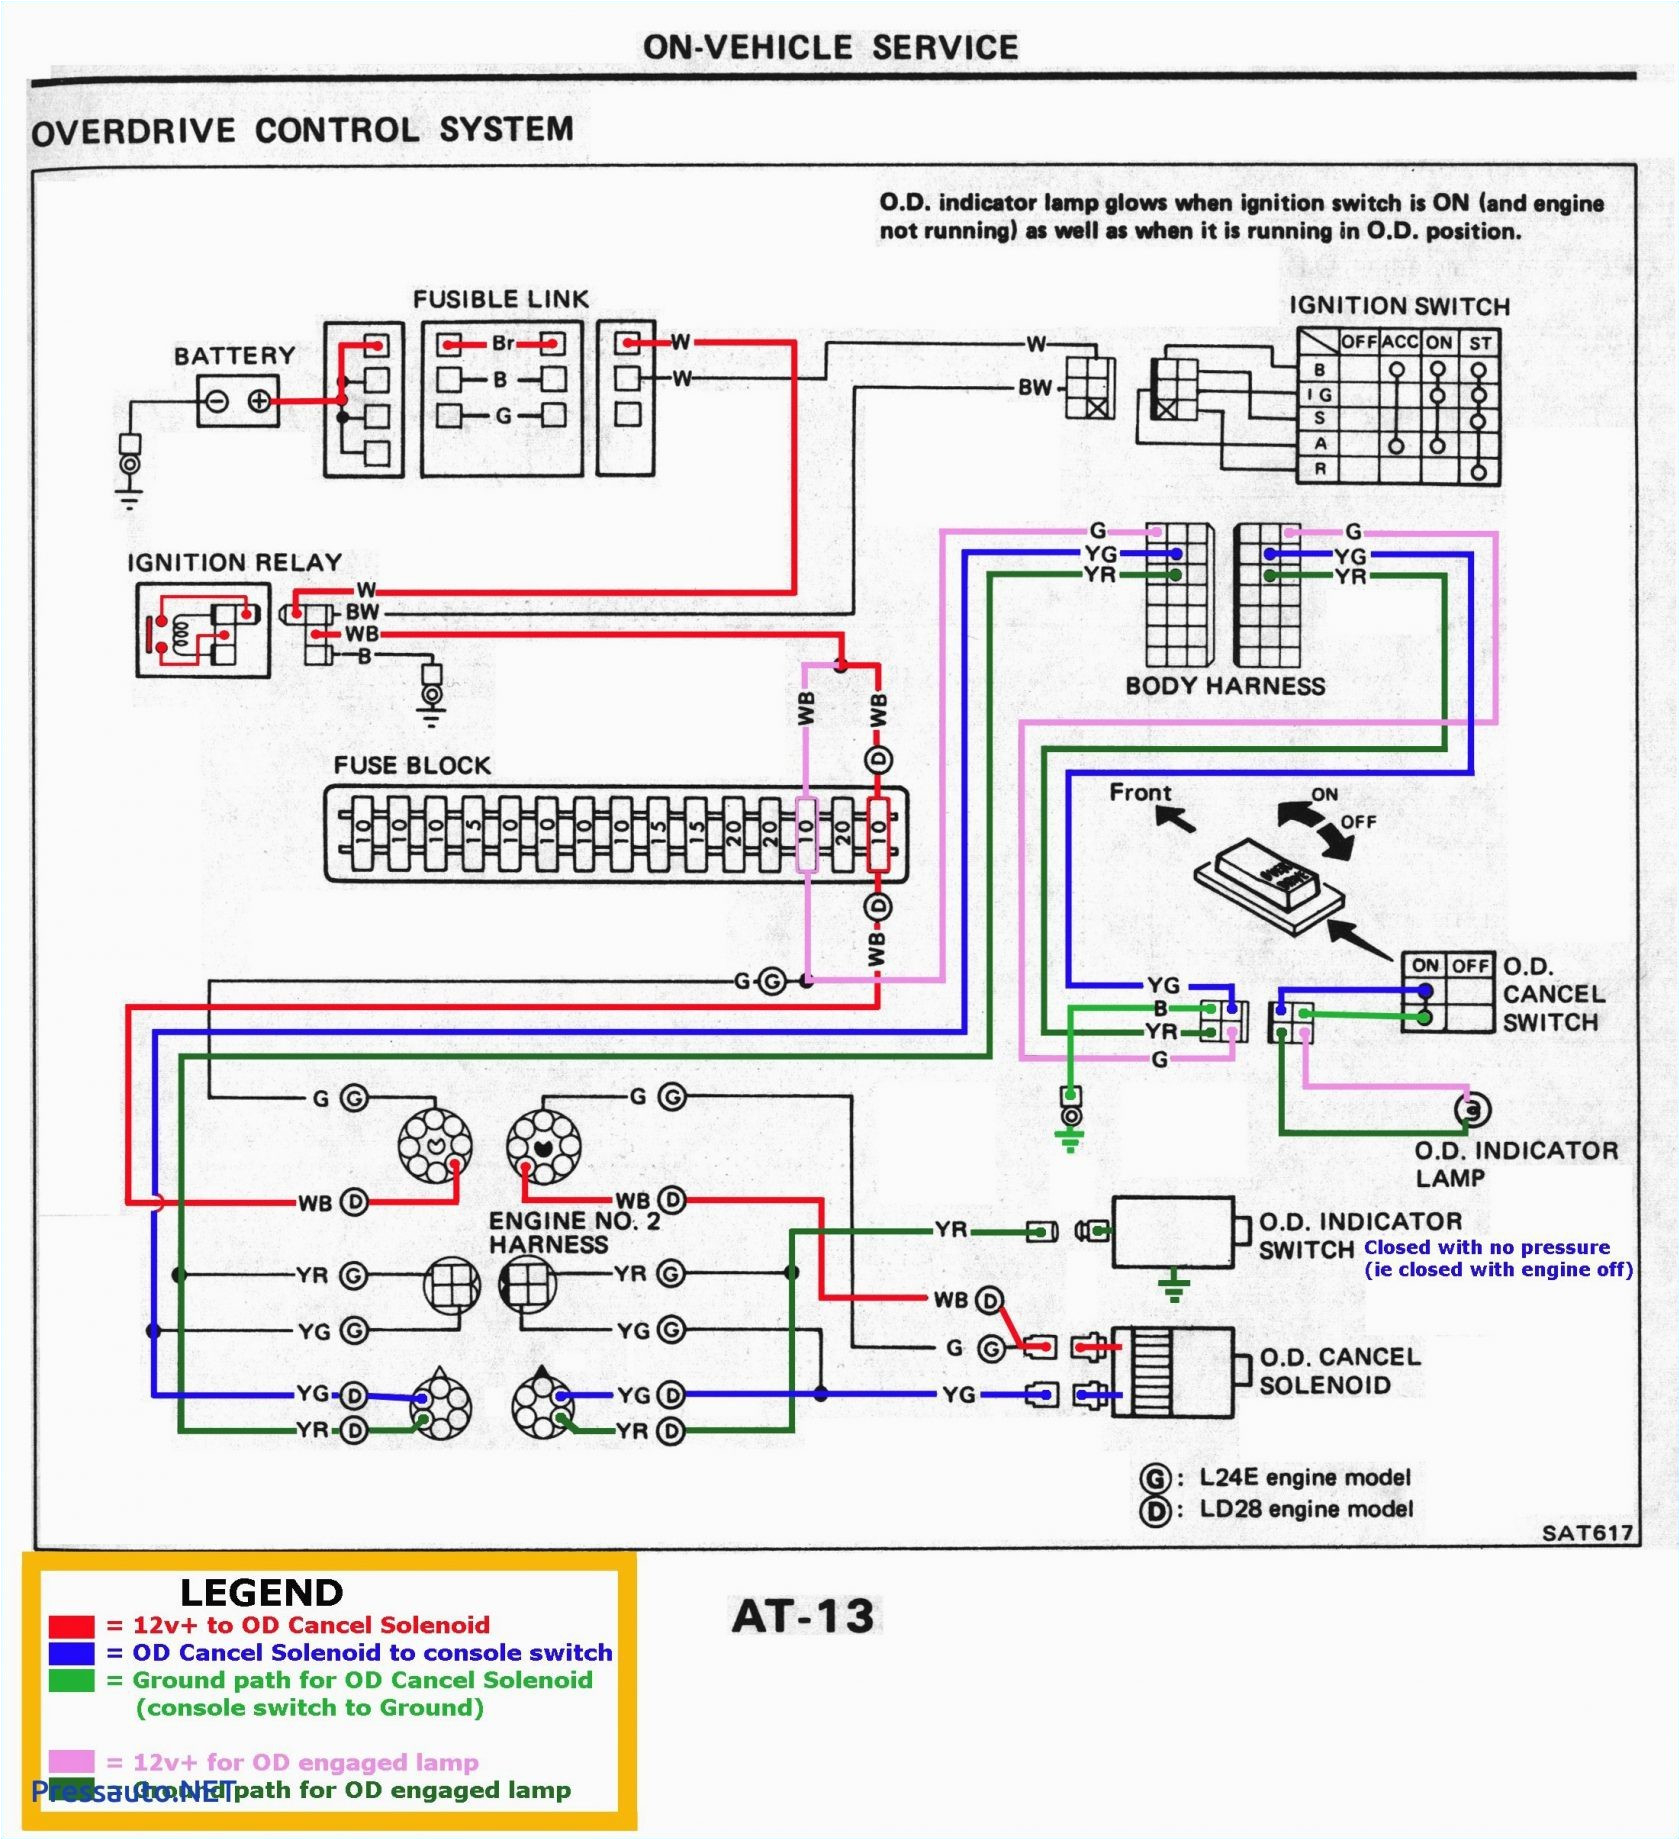 wiring harness for gm 13020122 wiring diagram info wiring harness for gm 13020122